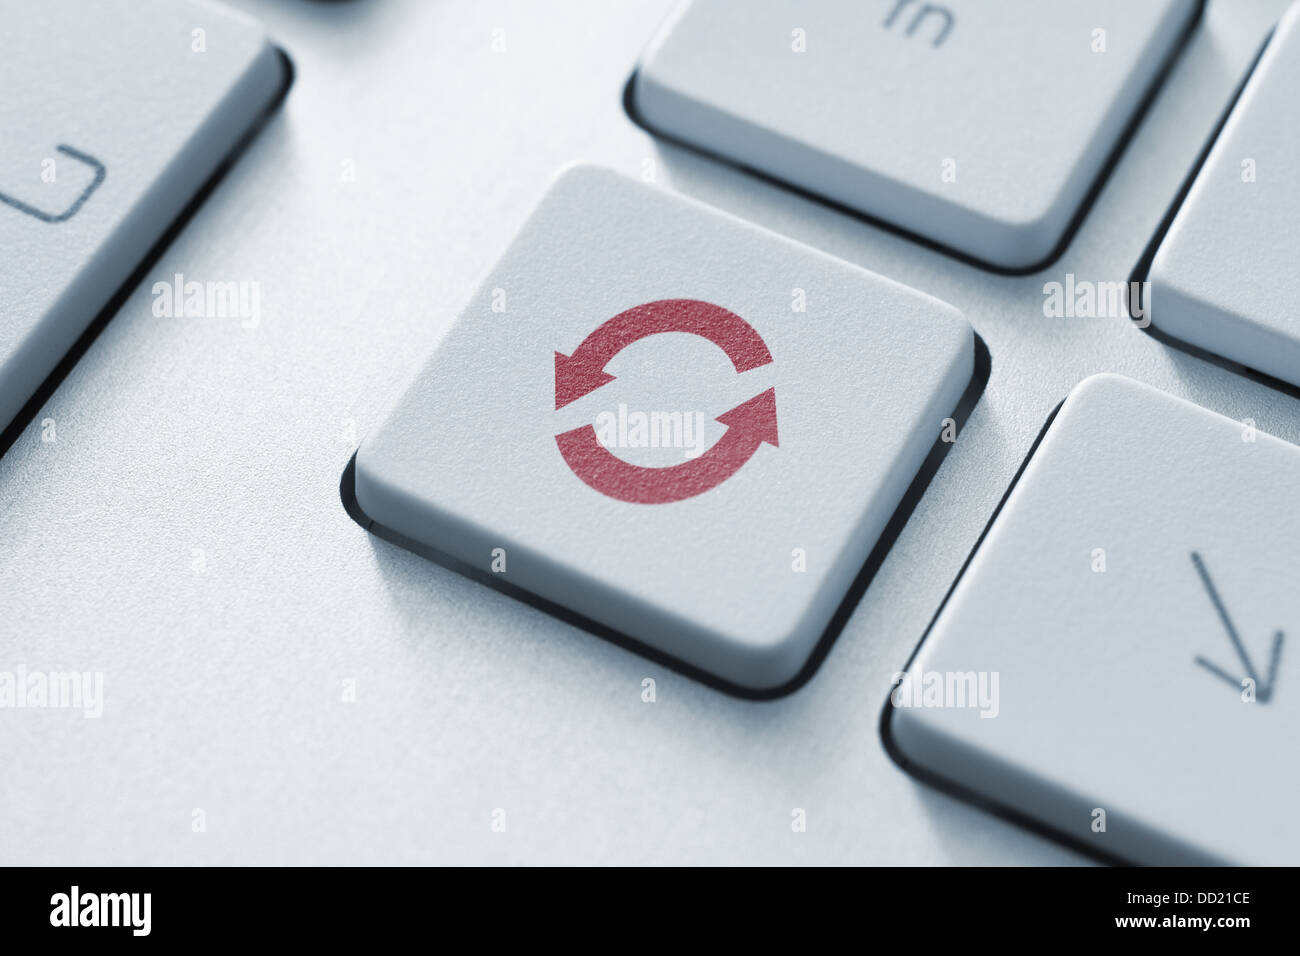 Button with update or synchronize icon on a modern computer keyboard. Stock Photo